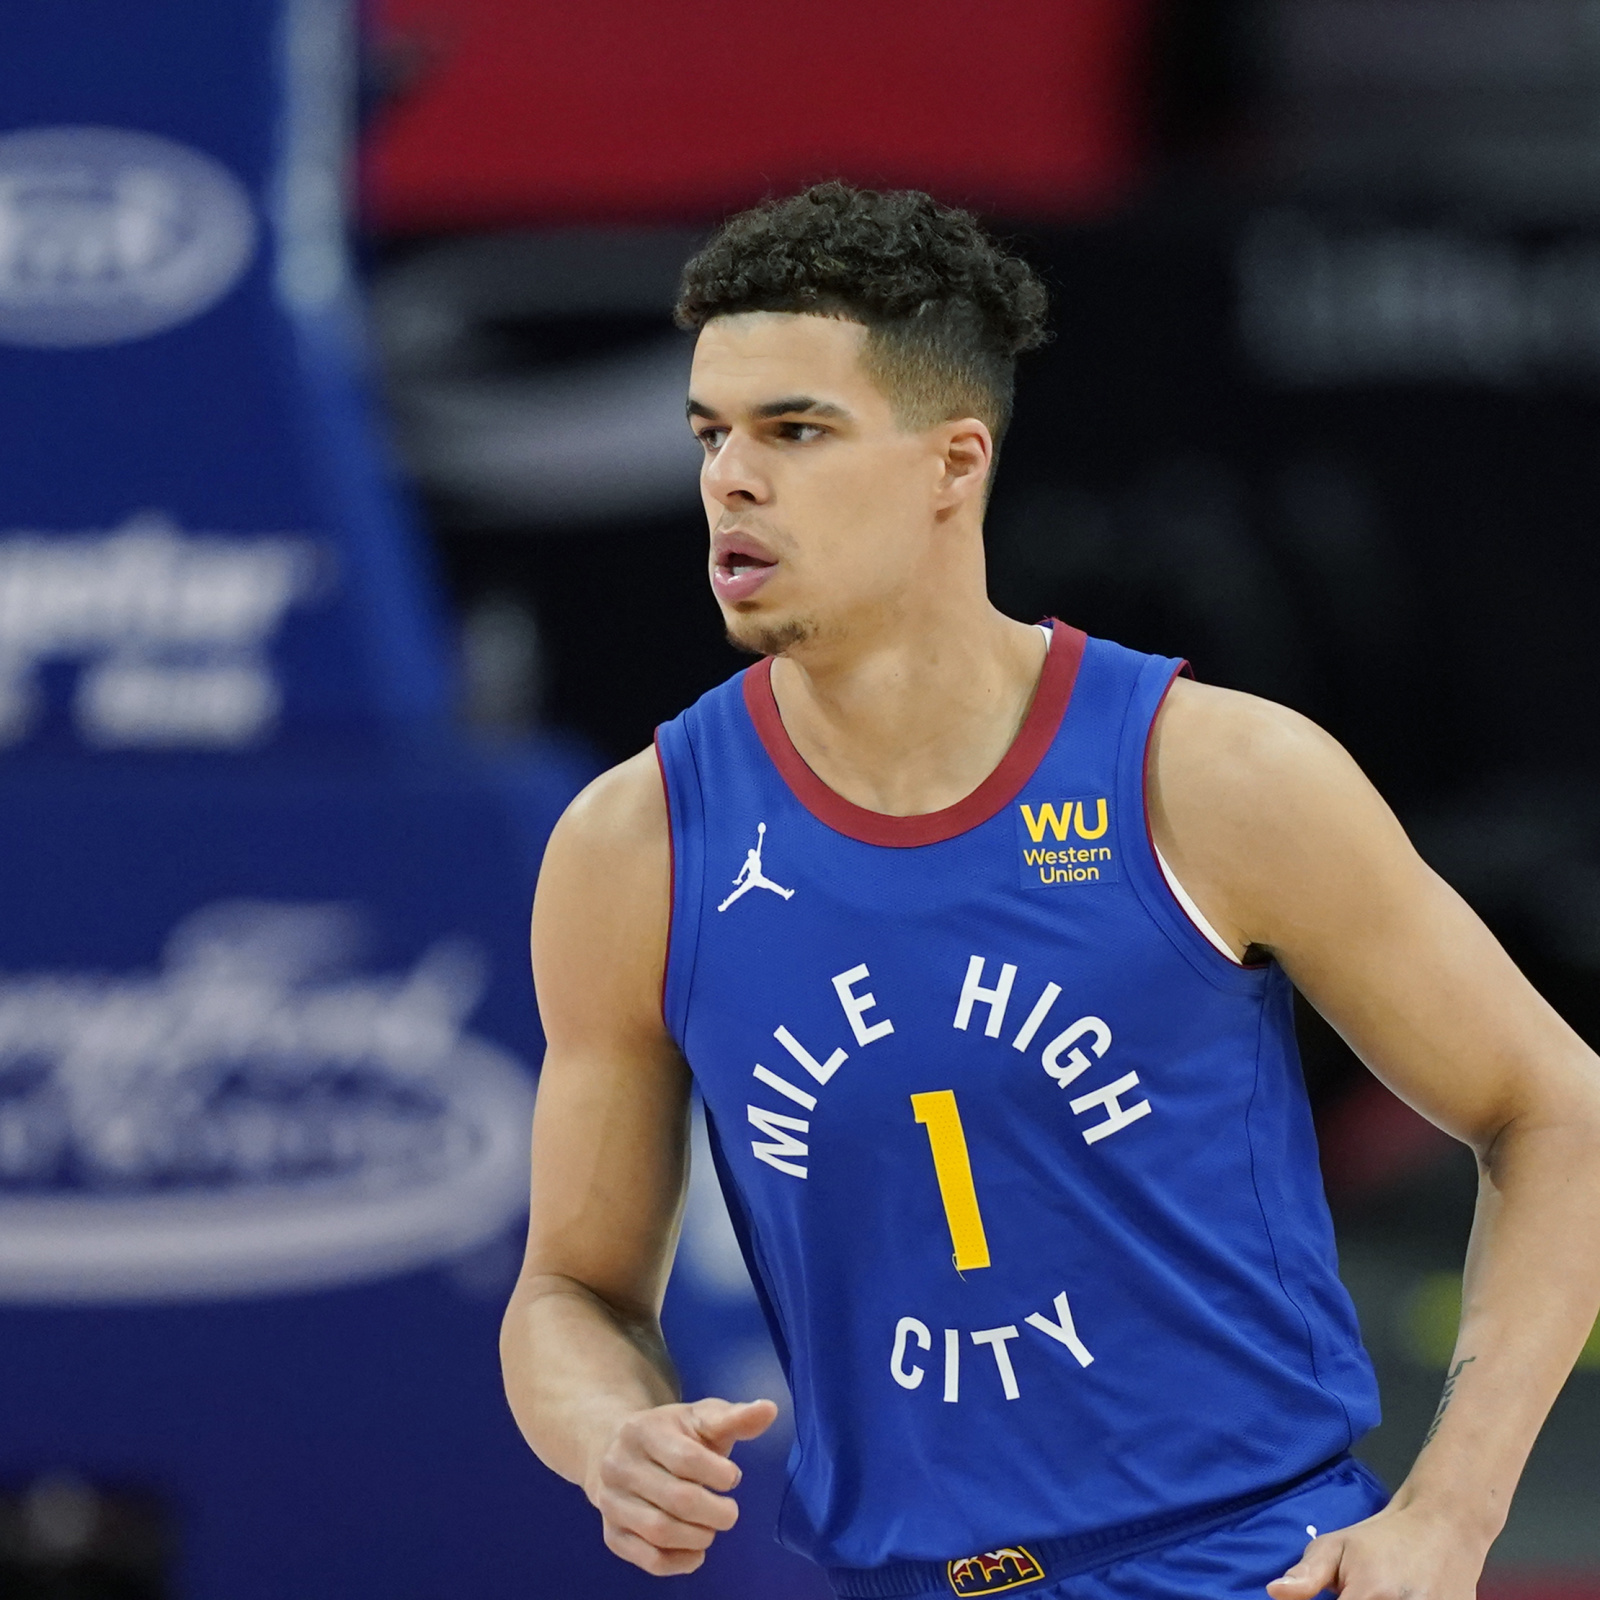 Nuggets' Michael Porter Jr says Covid-19 is being used 'to control the  masses', Denver Nuggets